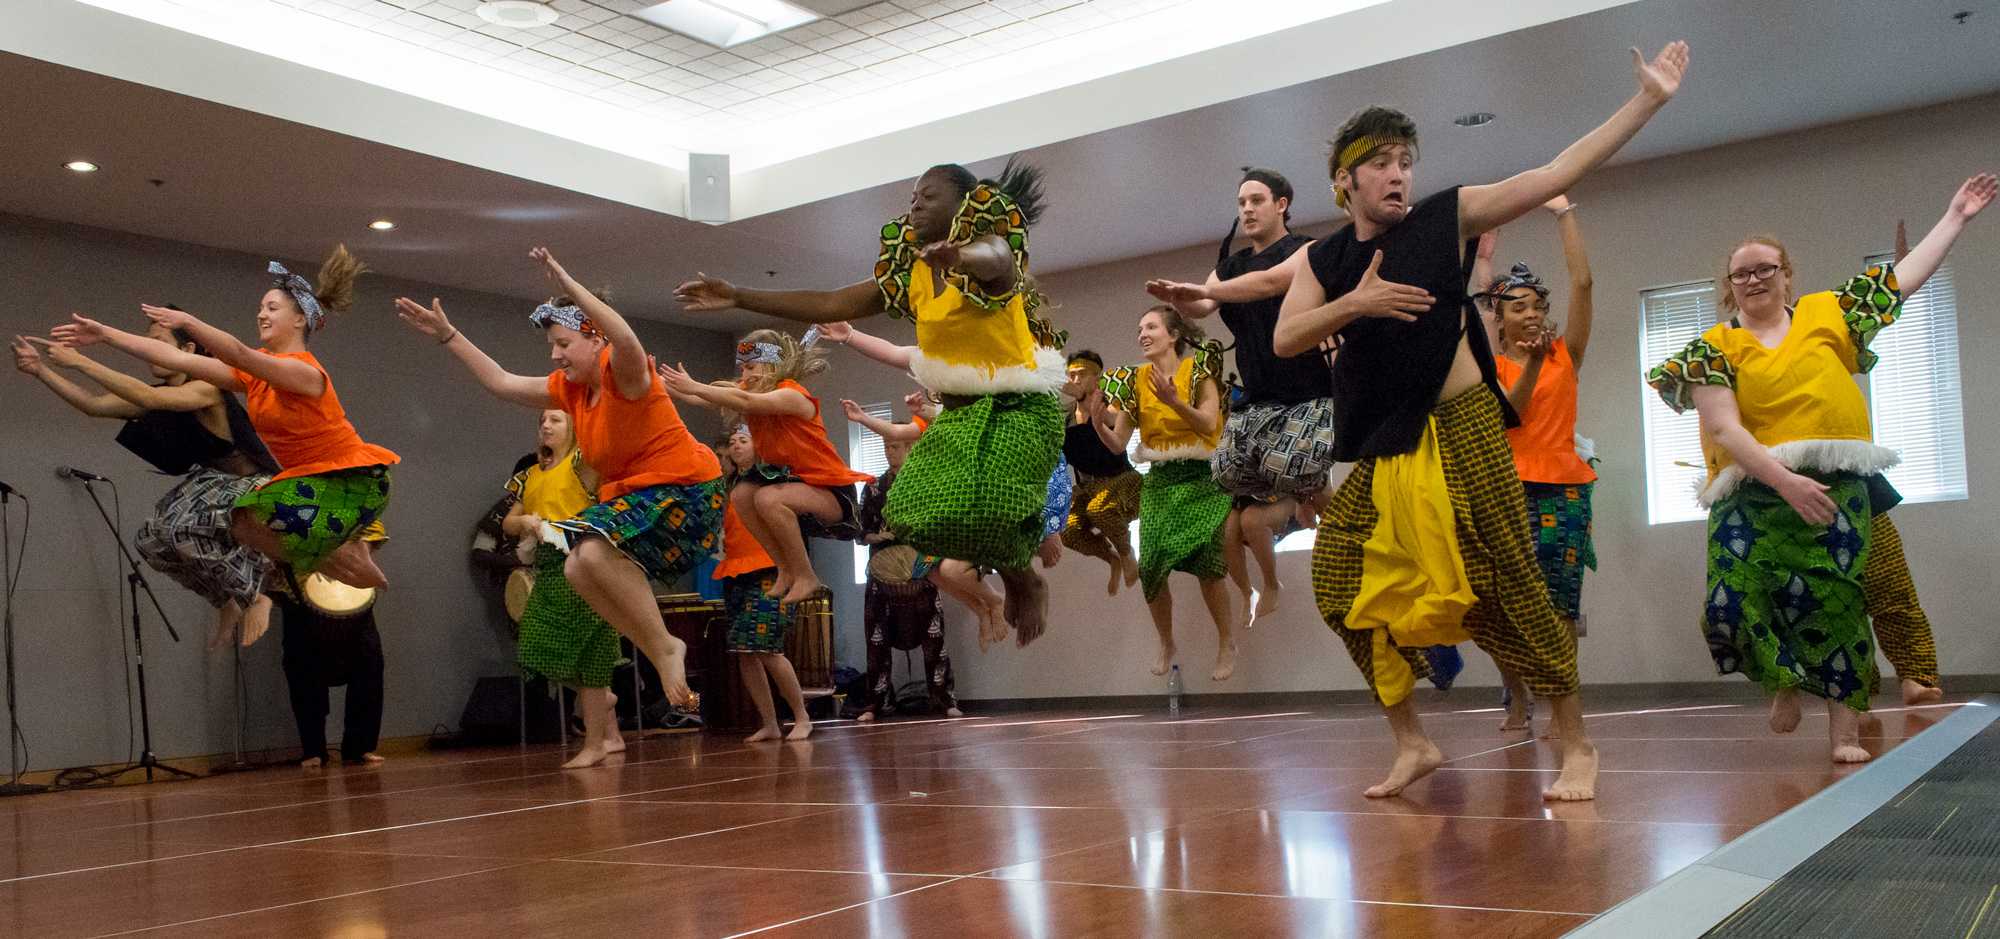 Students of the African Dance class perform in Lineville Falls Room in Plemmons Student Union on Tuesday evening during the Diversity Celebration. The African Dance class is taught by Associate Professor Sherone Price. Photo by Dallas Linger.